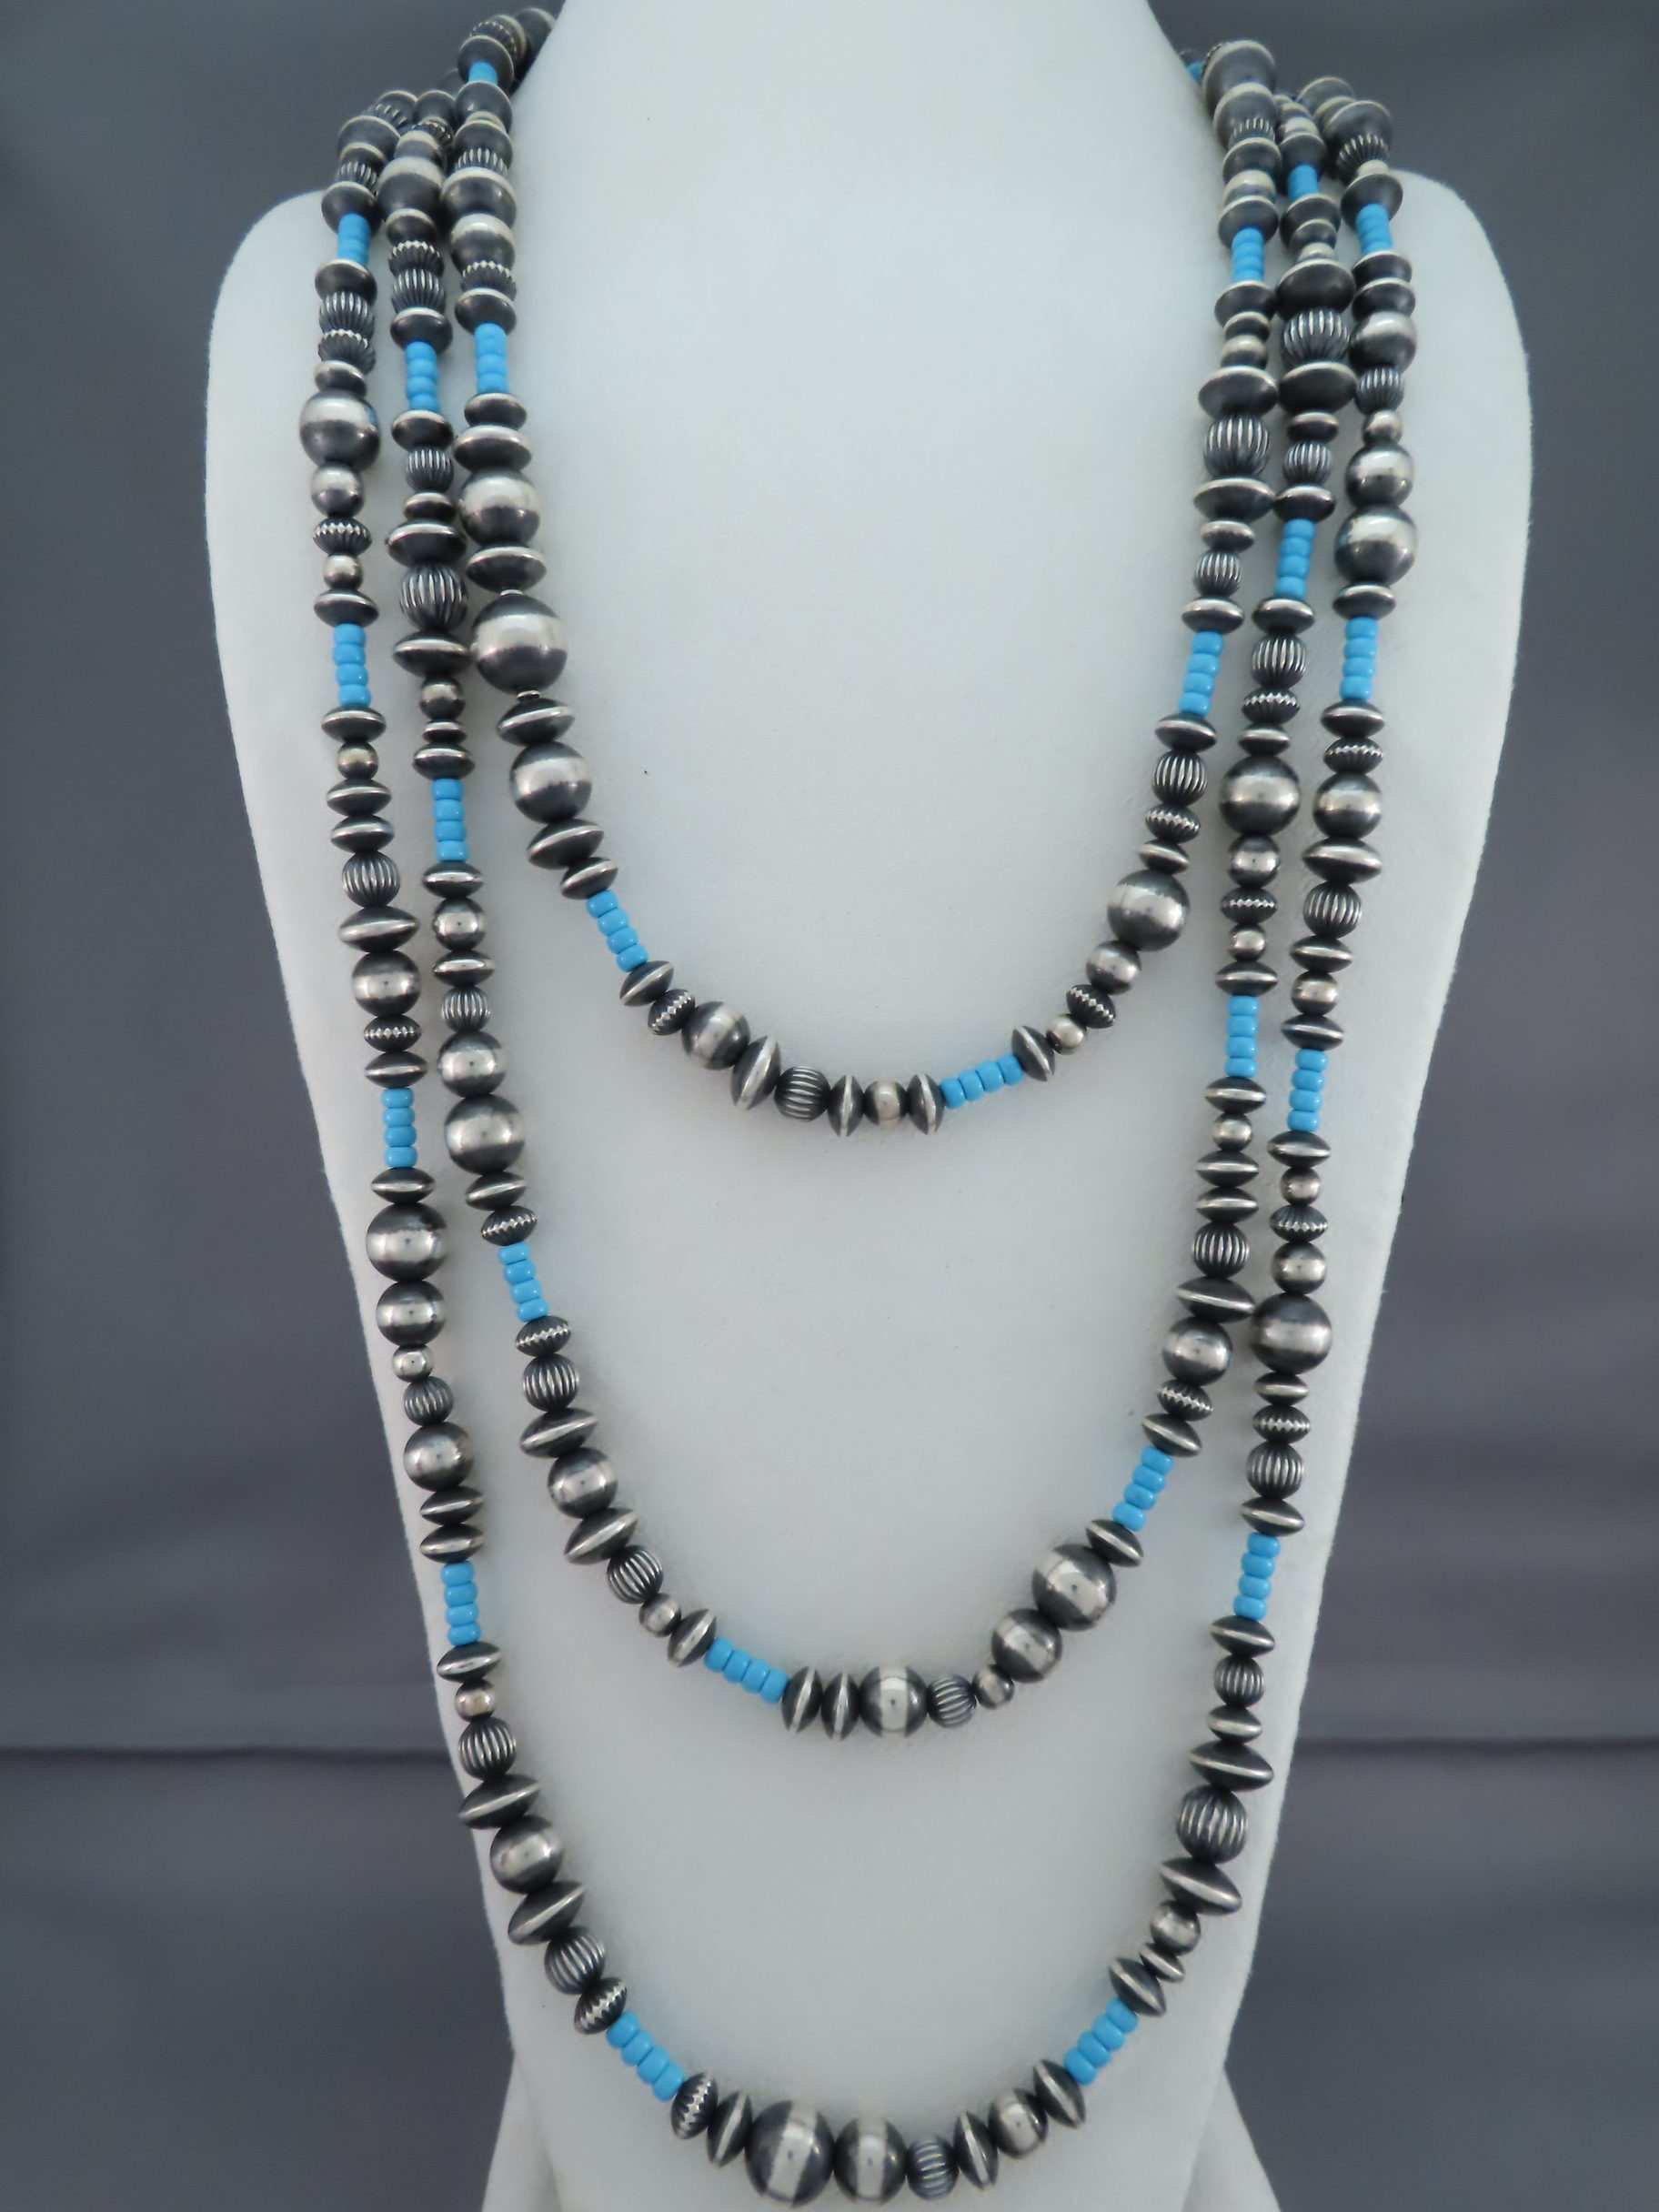 Navajo Jewelry - LONG Oxidized Sterling Silver Bead Necklace with Turquoise by Navajo jeweler, Marilyn Platero FOR SALE $1,395-